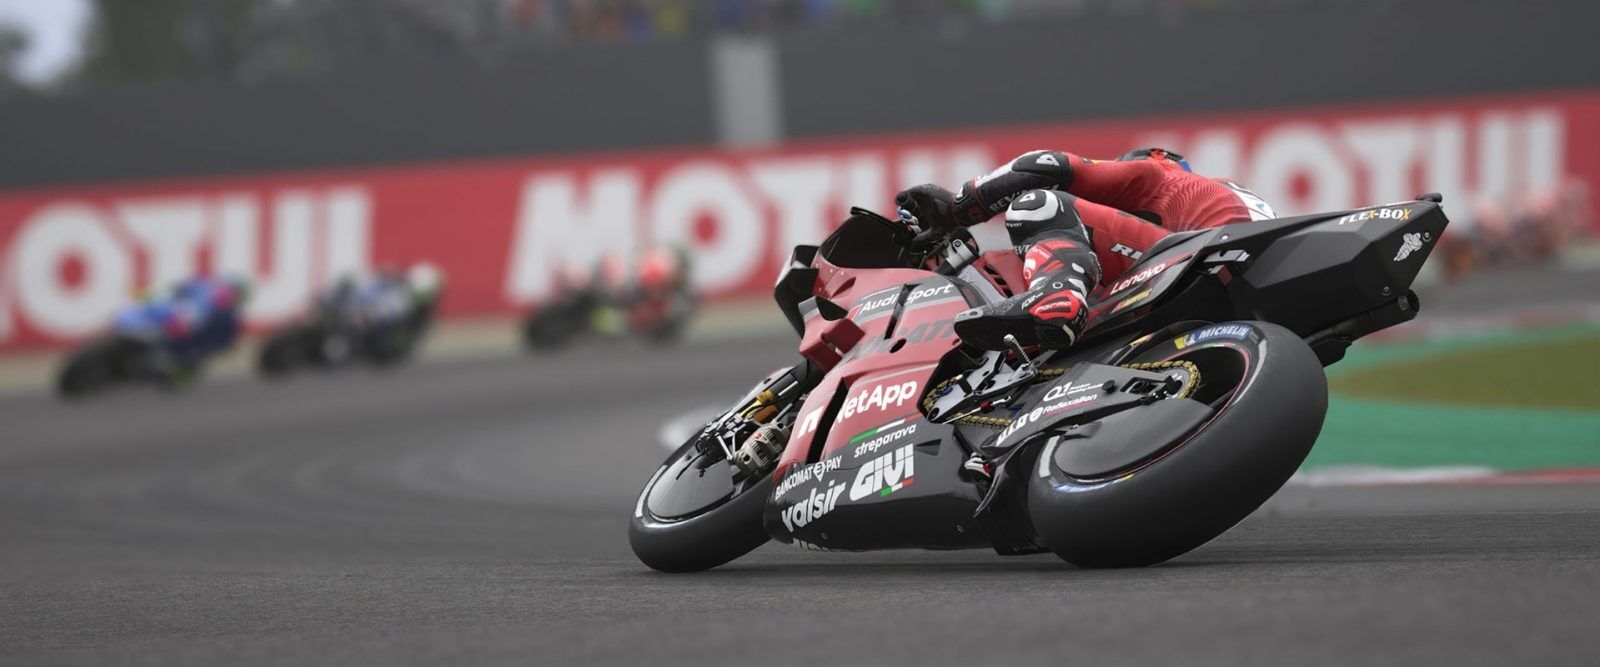 MotoGP: The ups and downs of esports racing on motorbikes